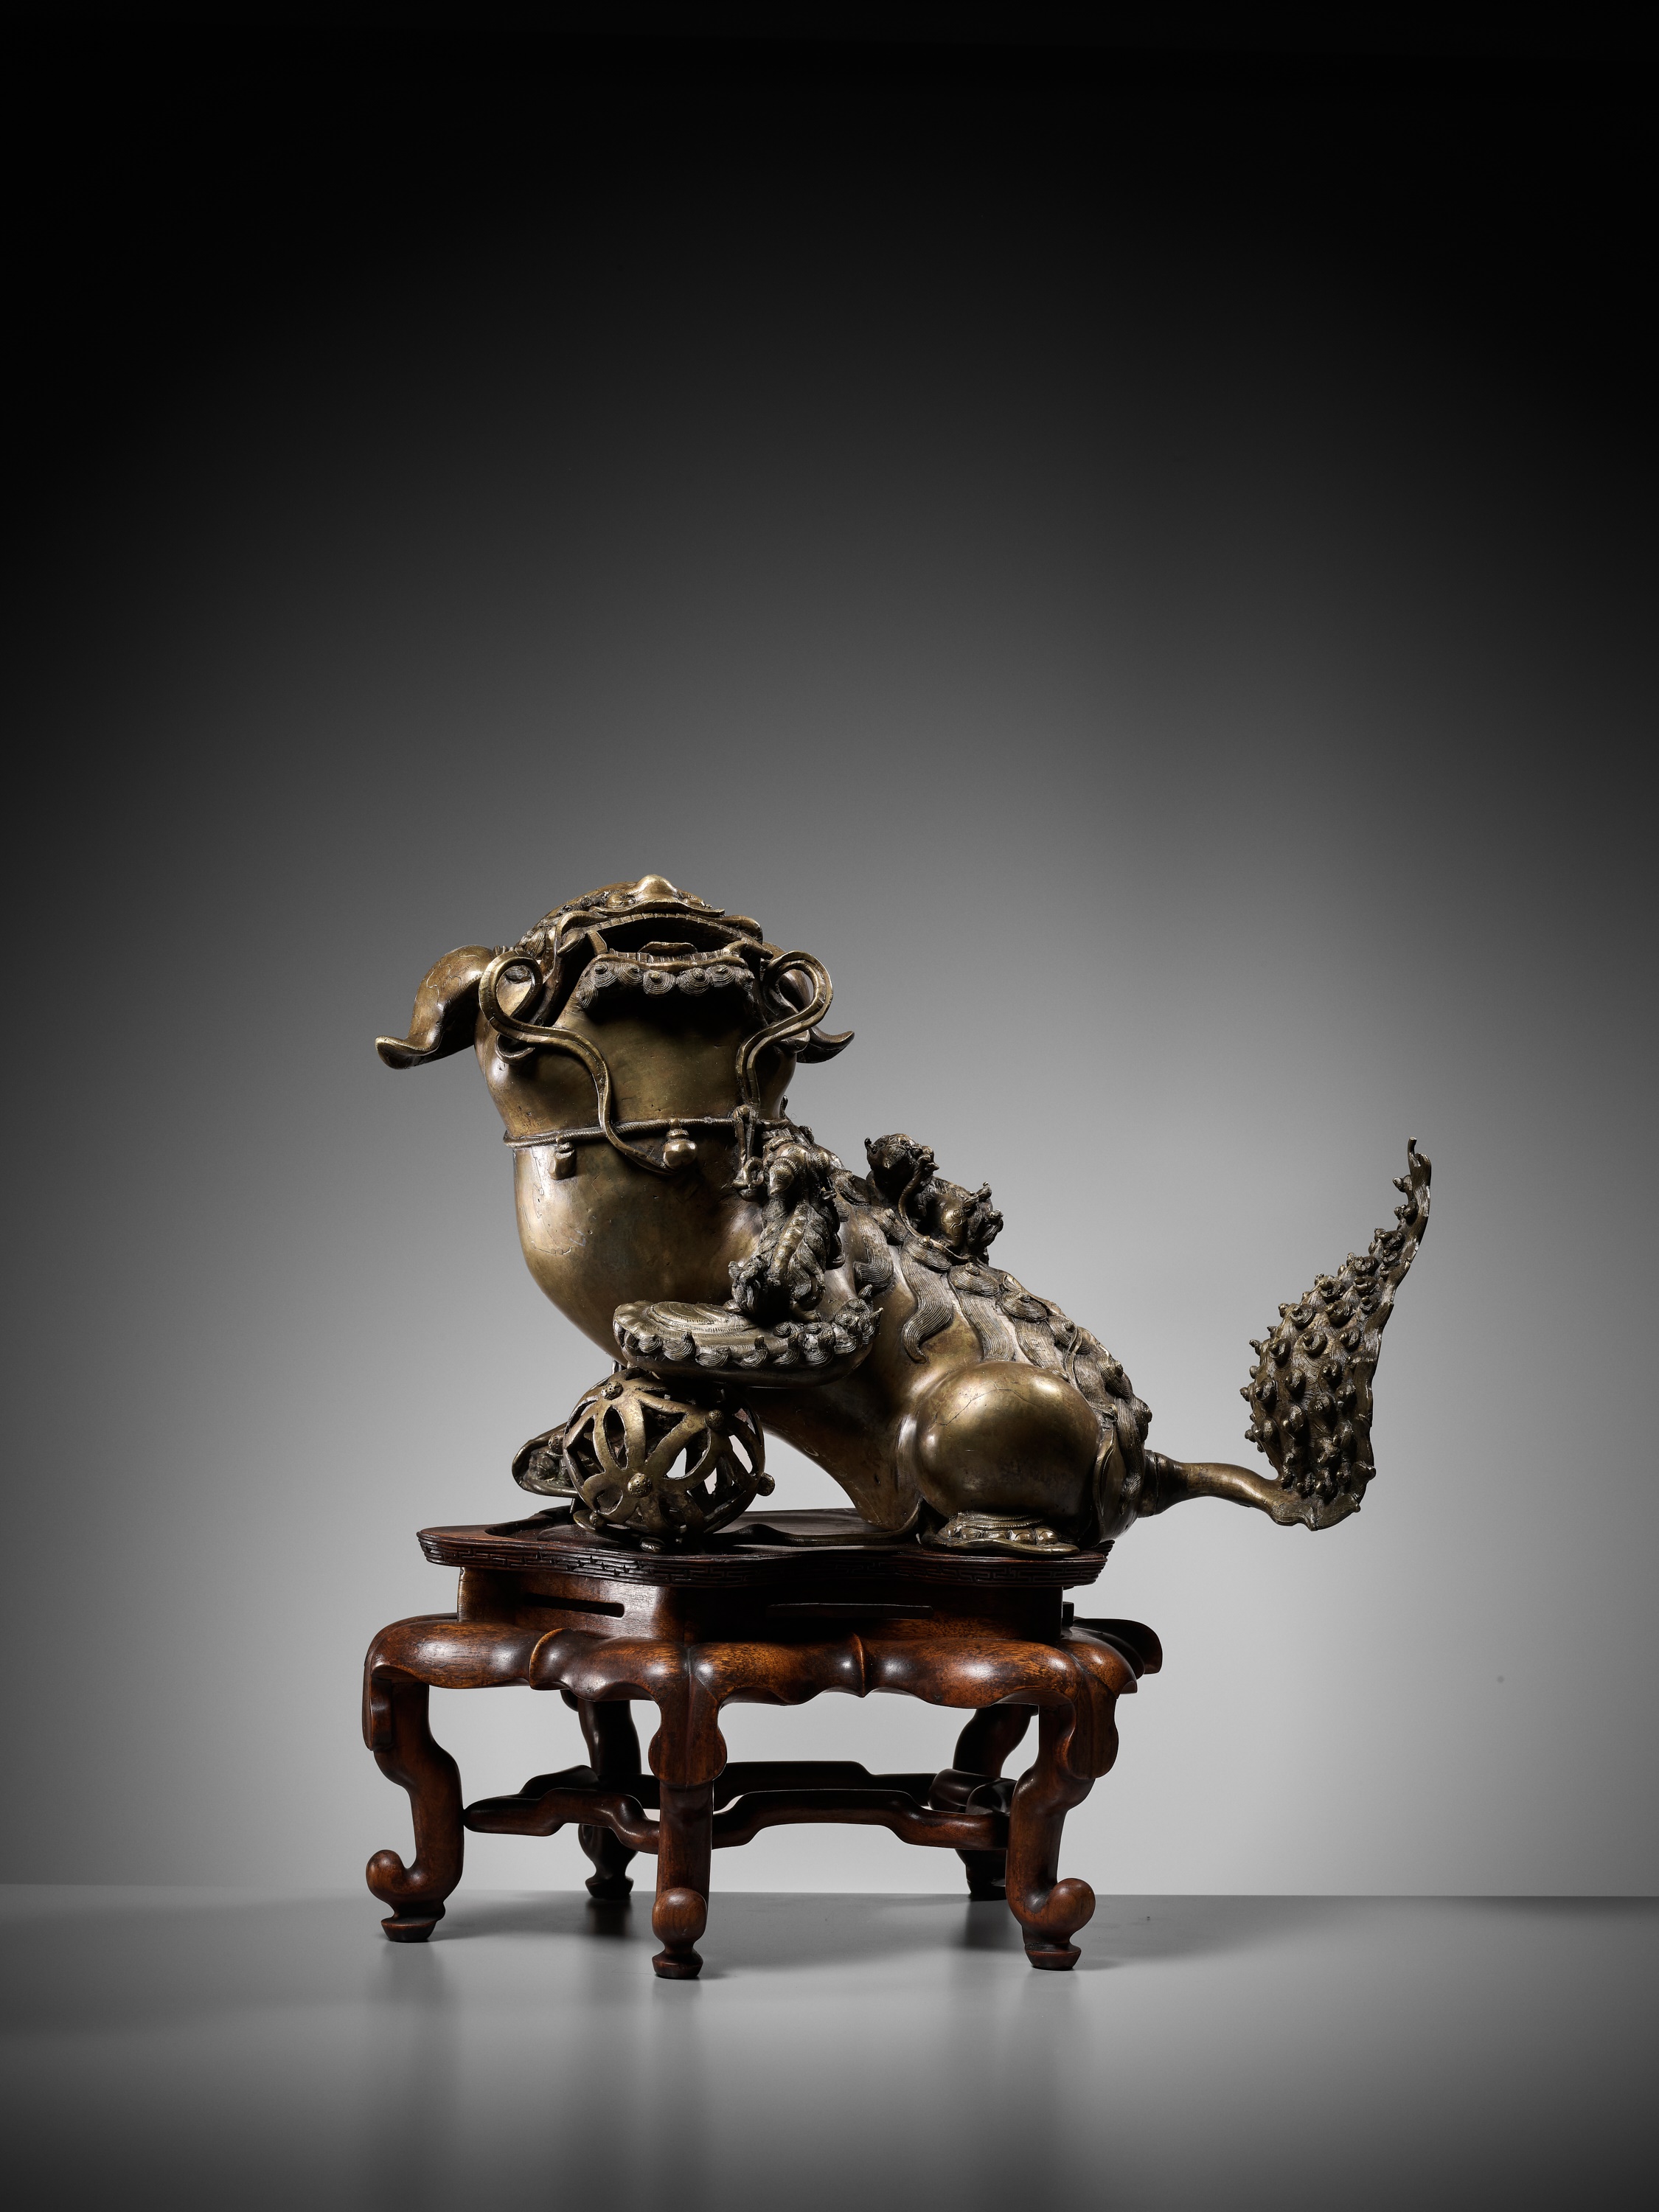 A MASSIVE AND VERY LARGE 'BUDDHIST LION' BRONZE CENSER, 17TH-18TH CENTURY - Image 9 of 10